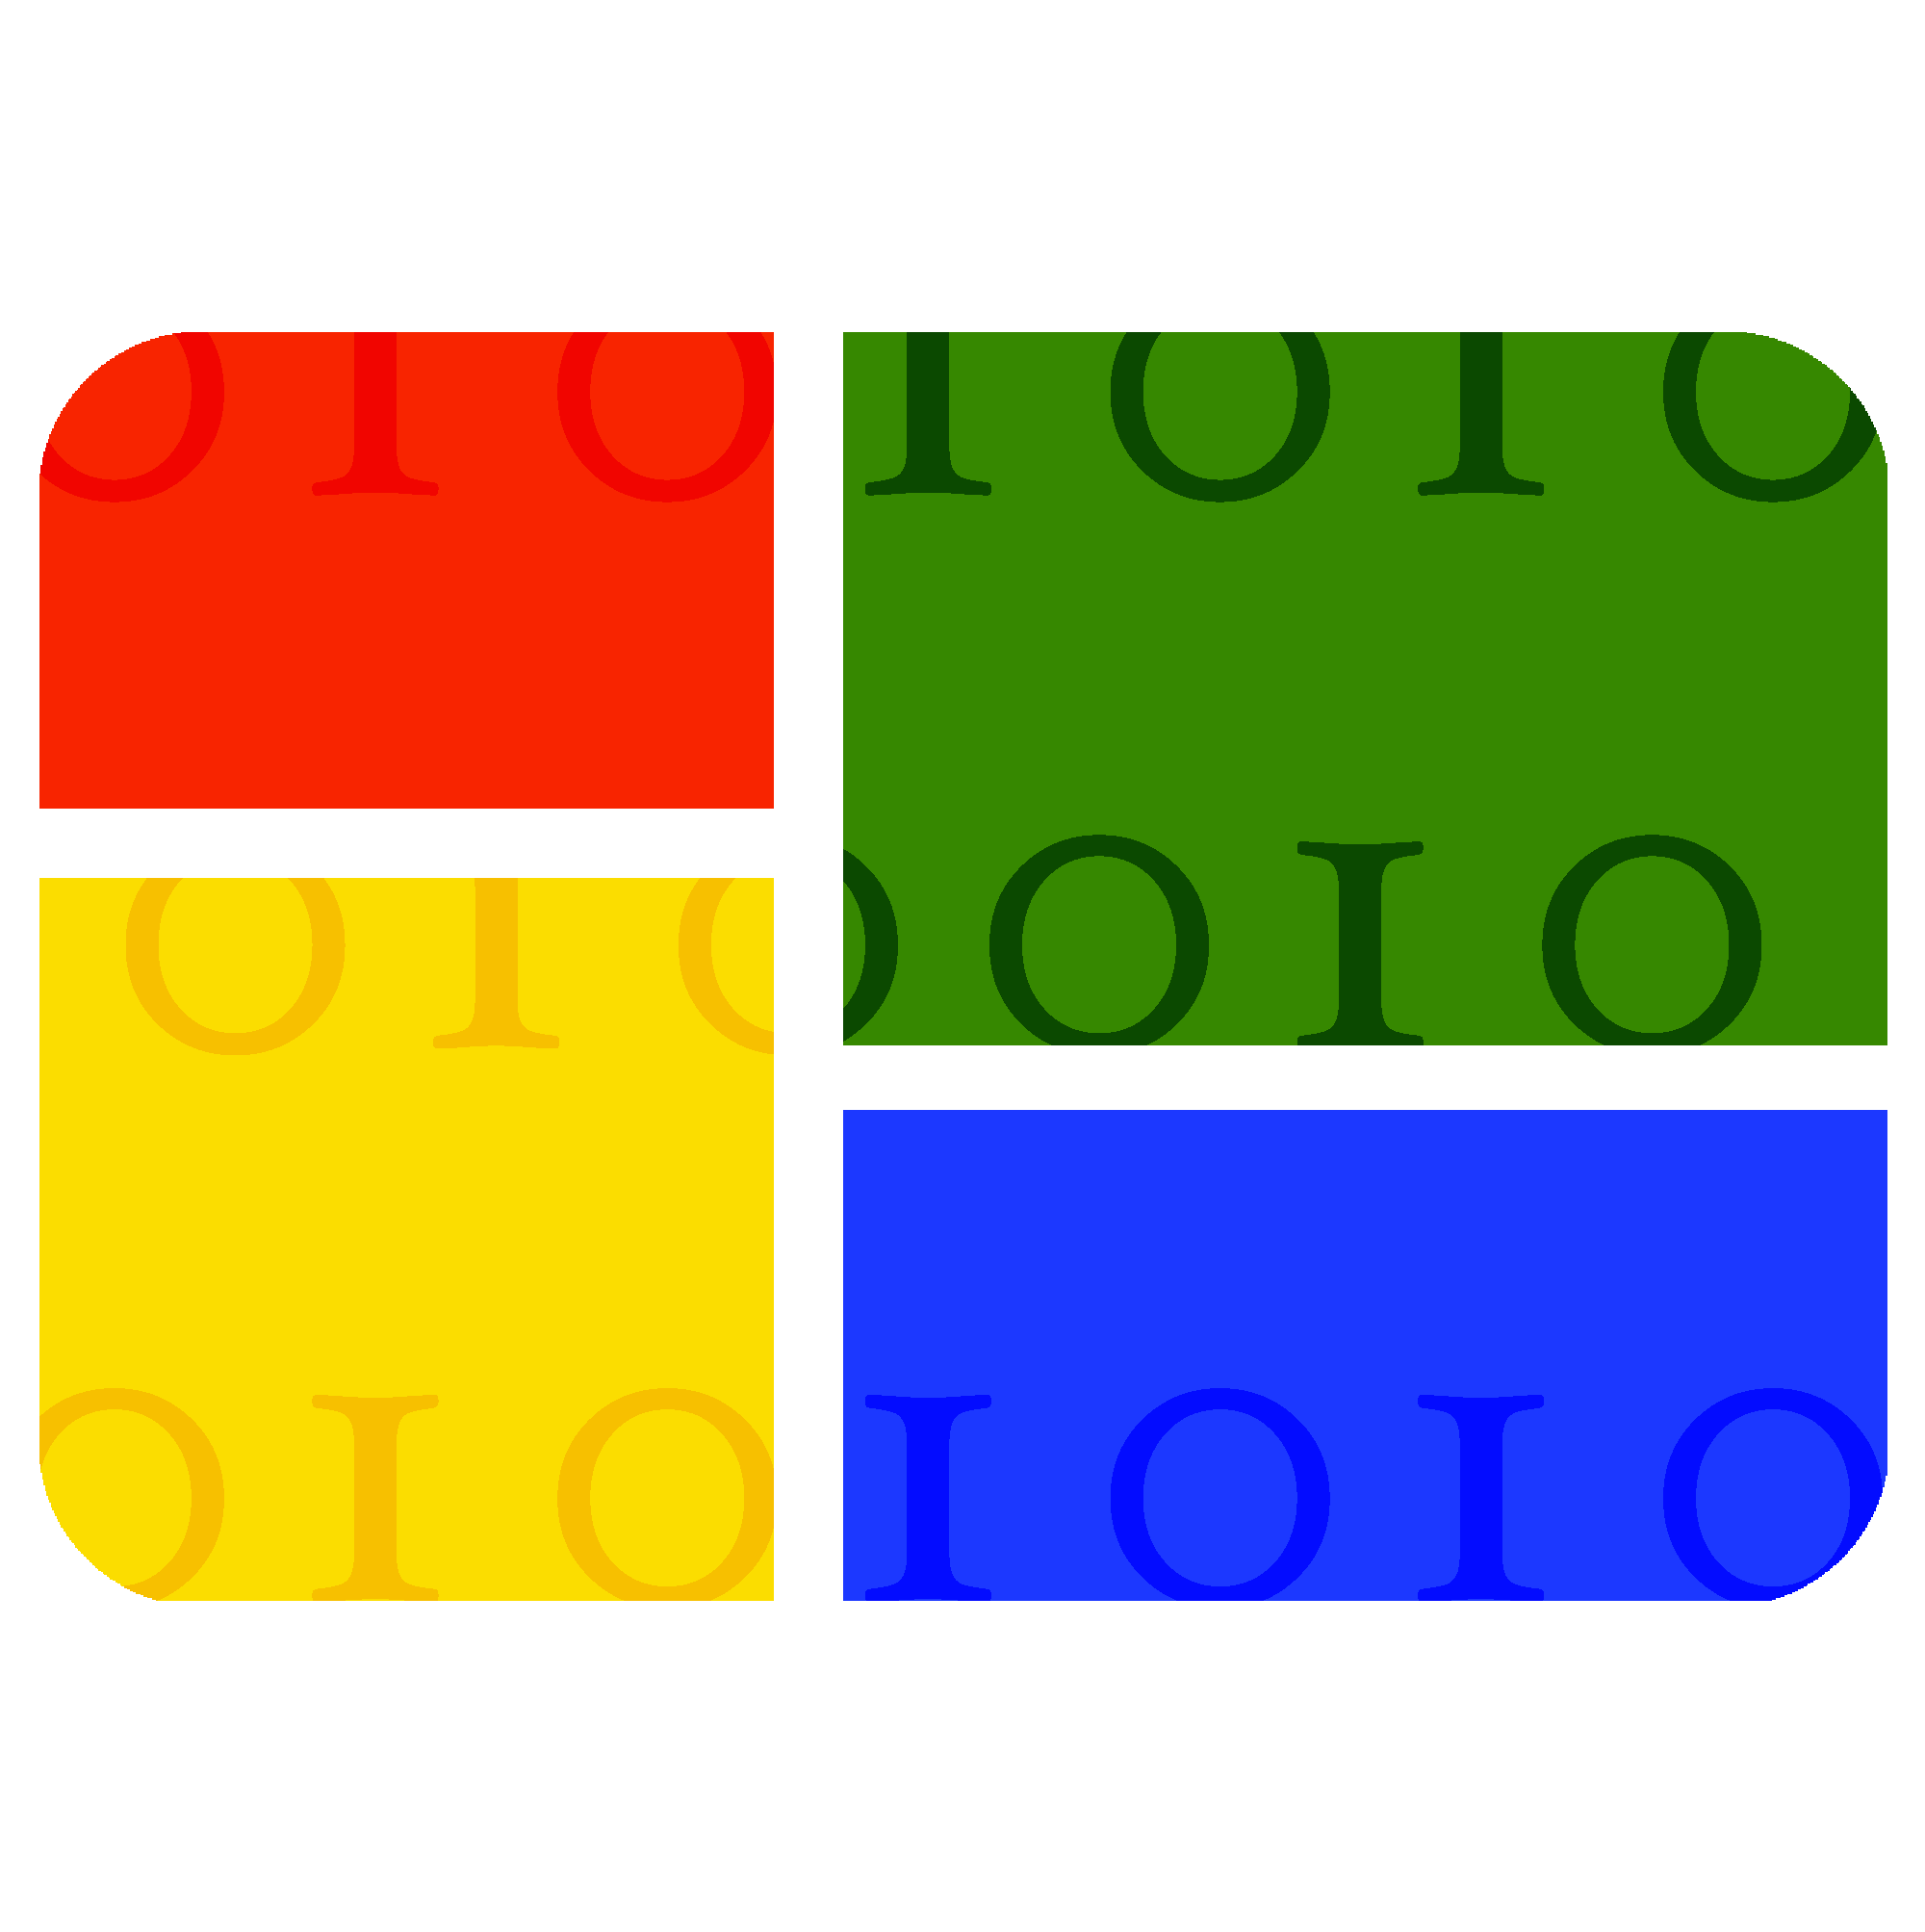 Old Windows Logo - Real Windows logos in the style of the old Windows 10000 logo